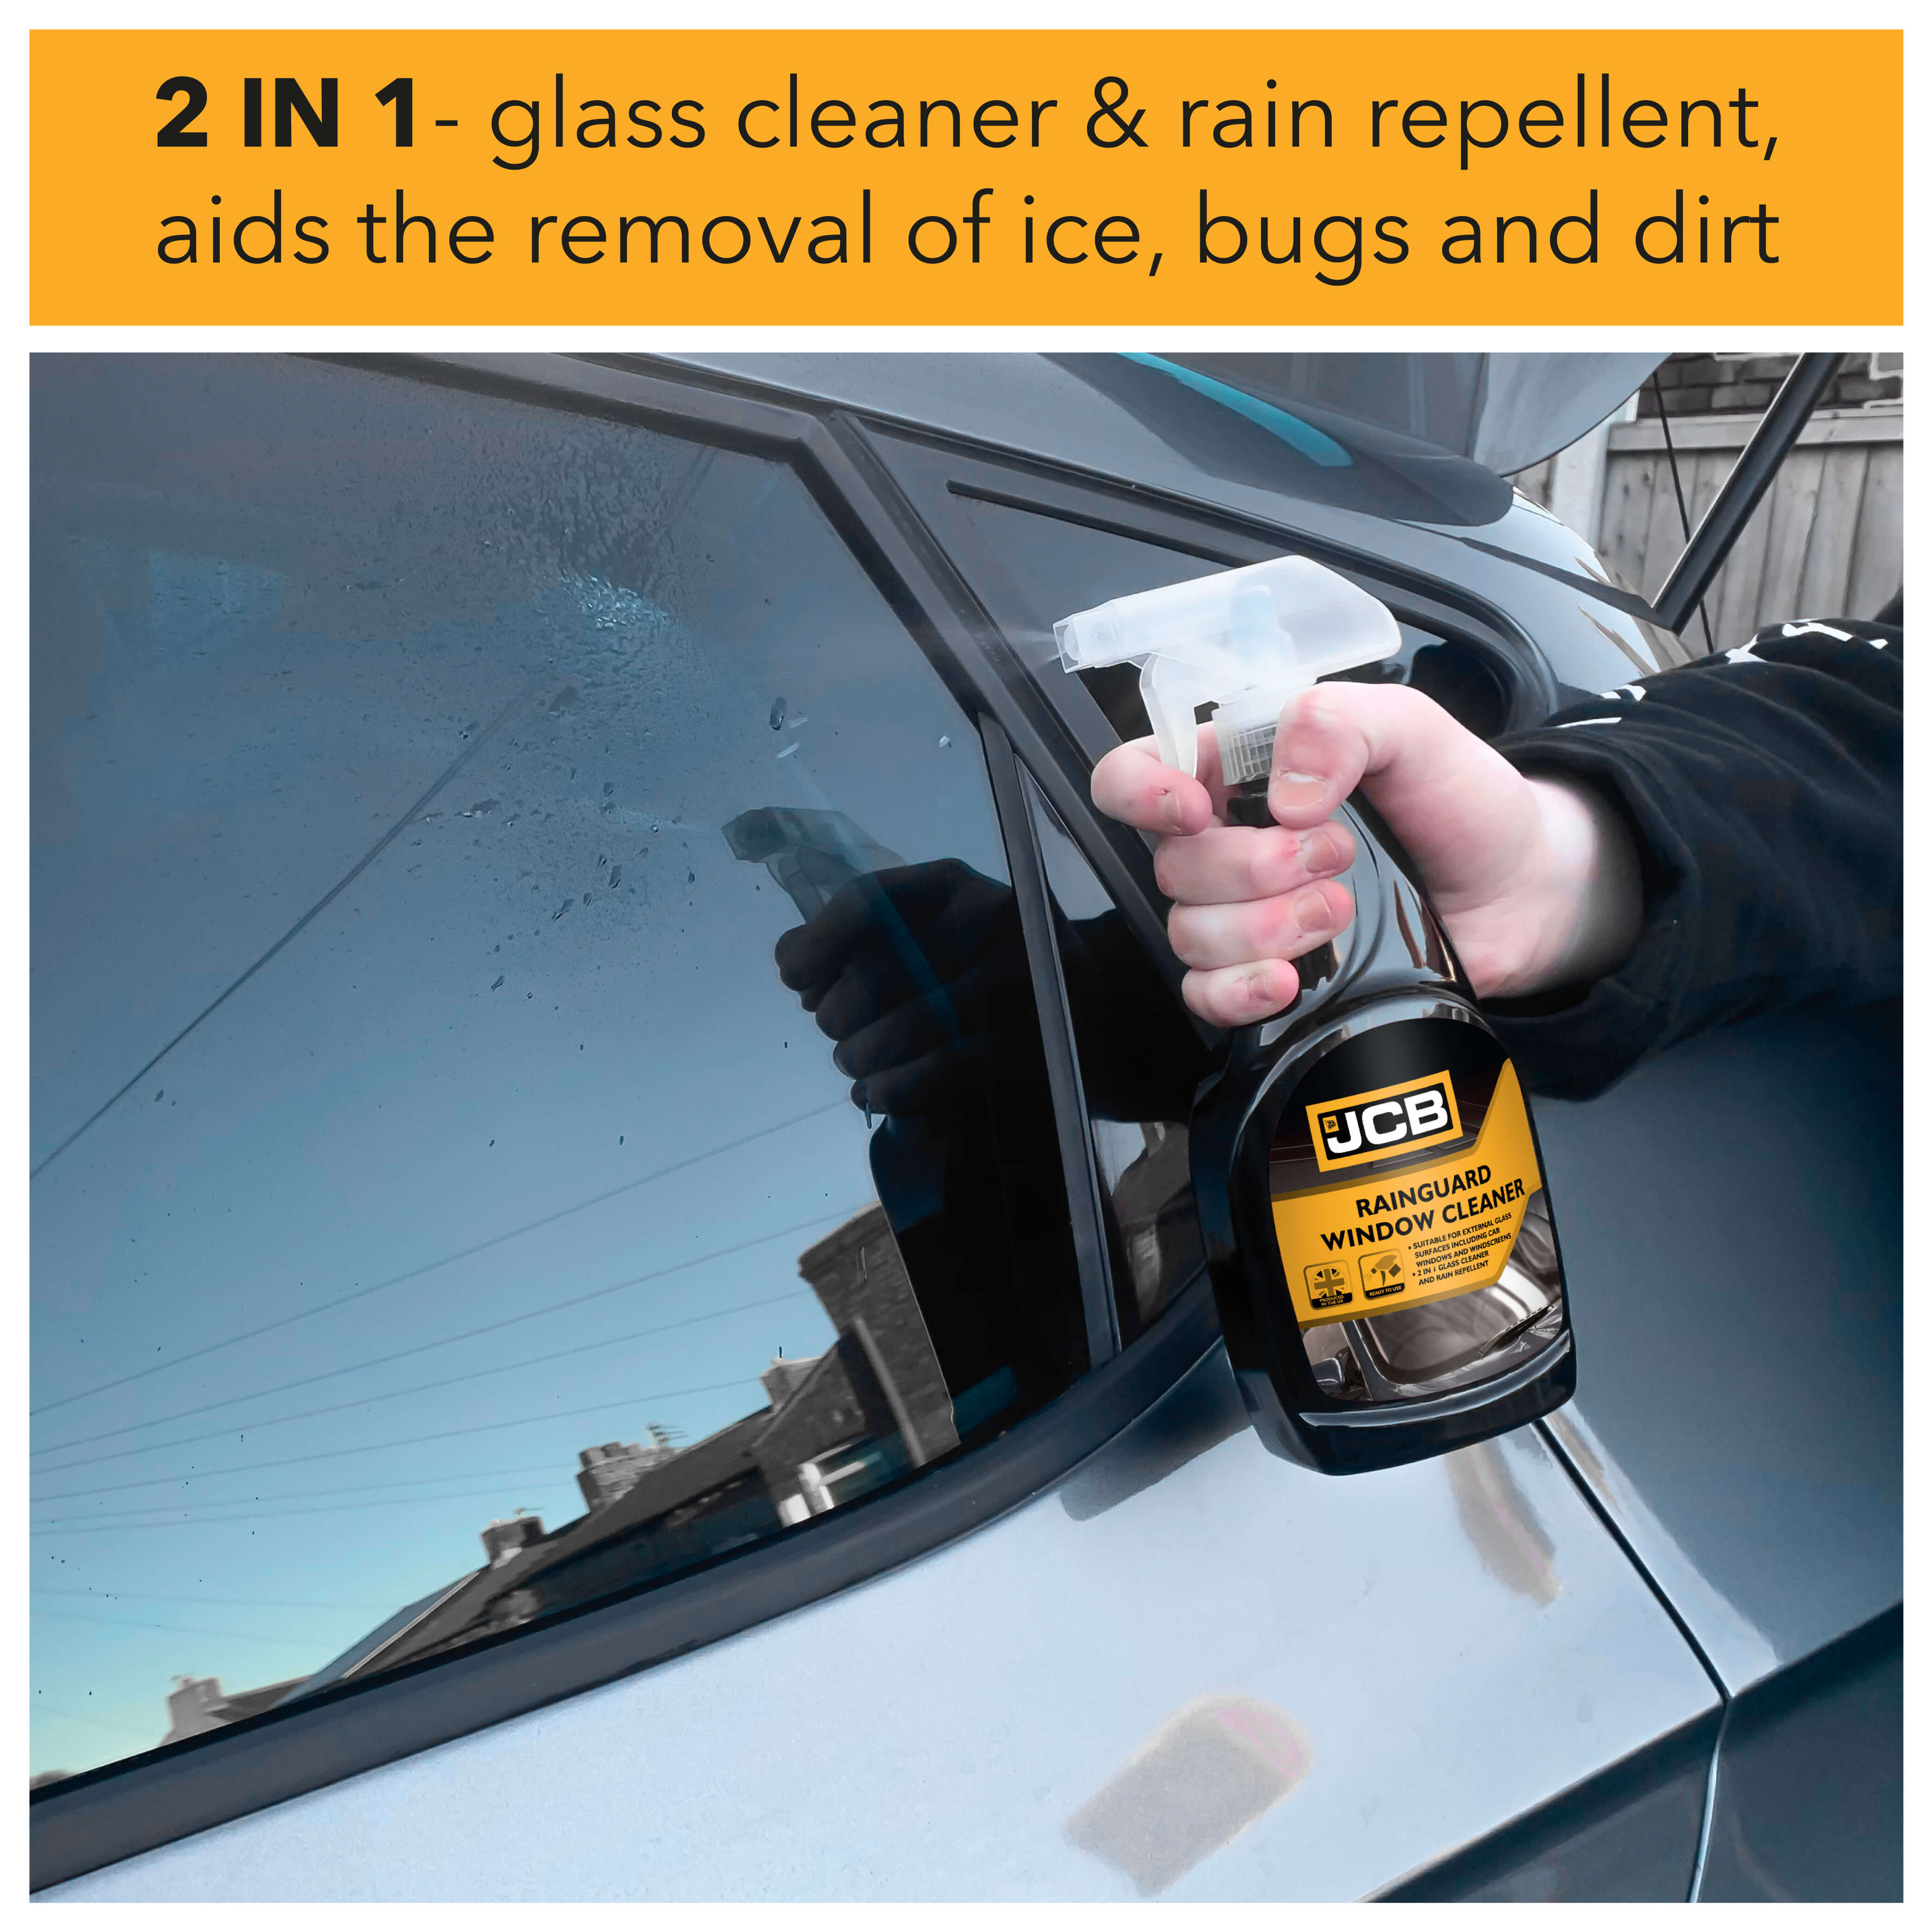 2 in 1- glass cleaner & rain repellent, aids the removal of ice, bugs and dirt